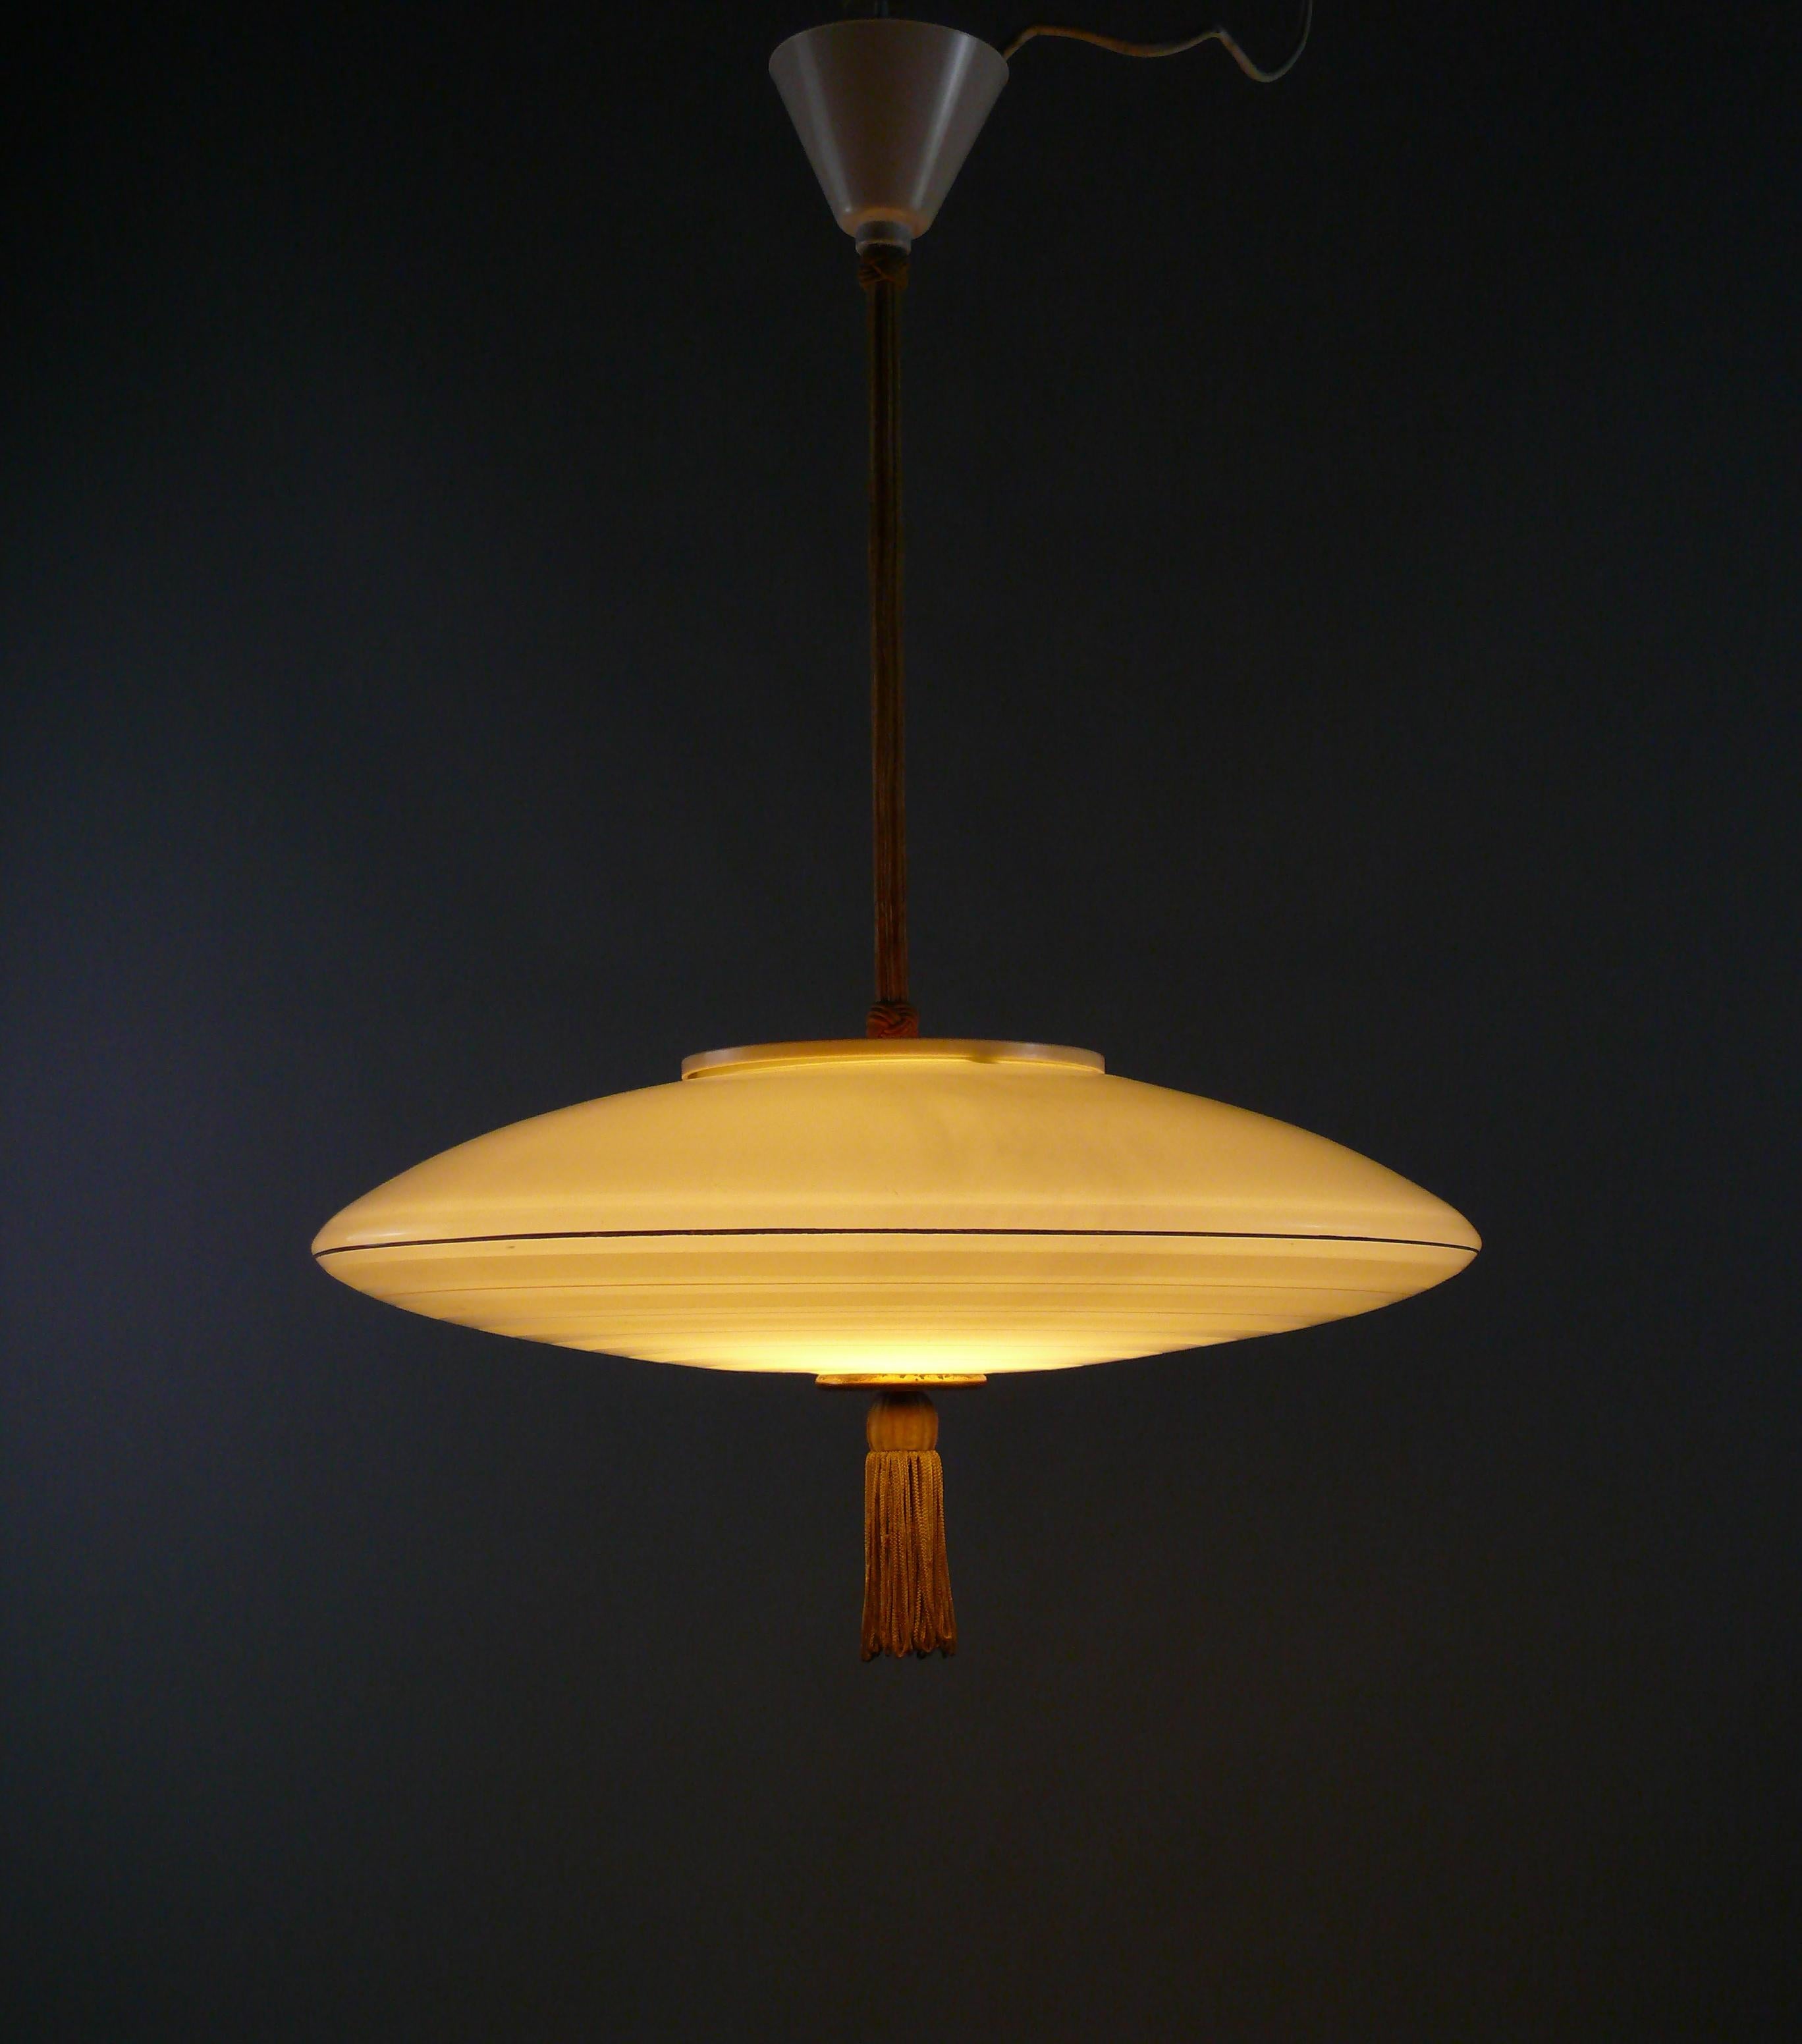 Large rod pendant light from the 1950s with a beige glass shade, coated rod and plastic suspension.

The ufo-shaped glass shade has radial-shaped, gold-colored decorative strips and frosted areas. The lower end button is made of brass and has a